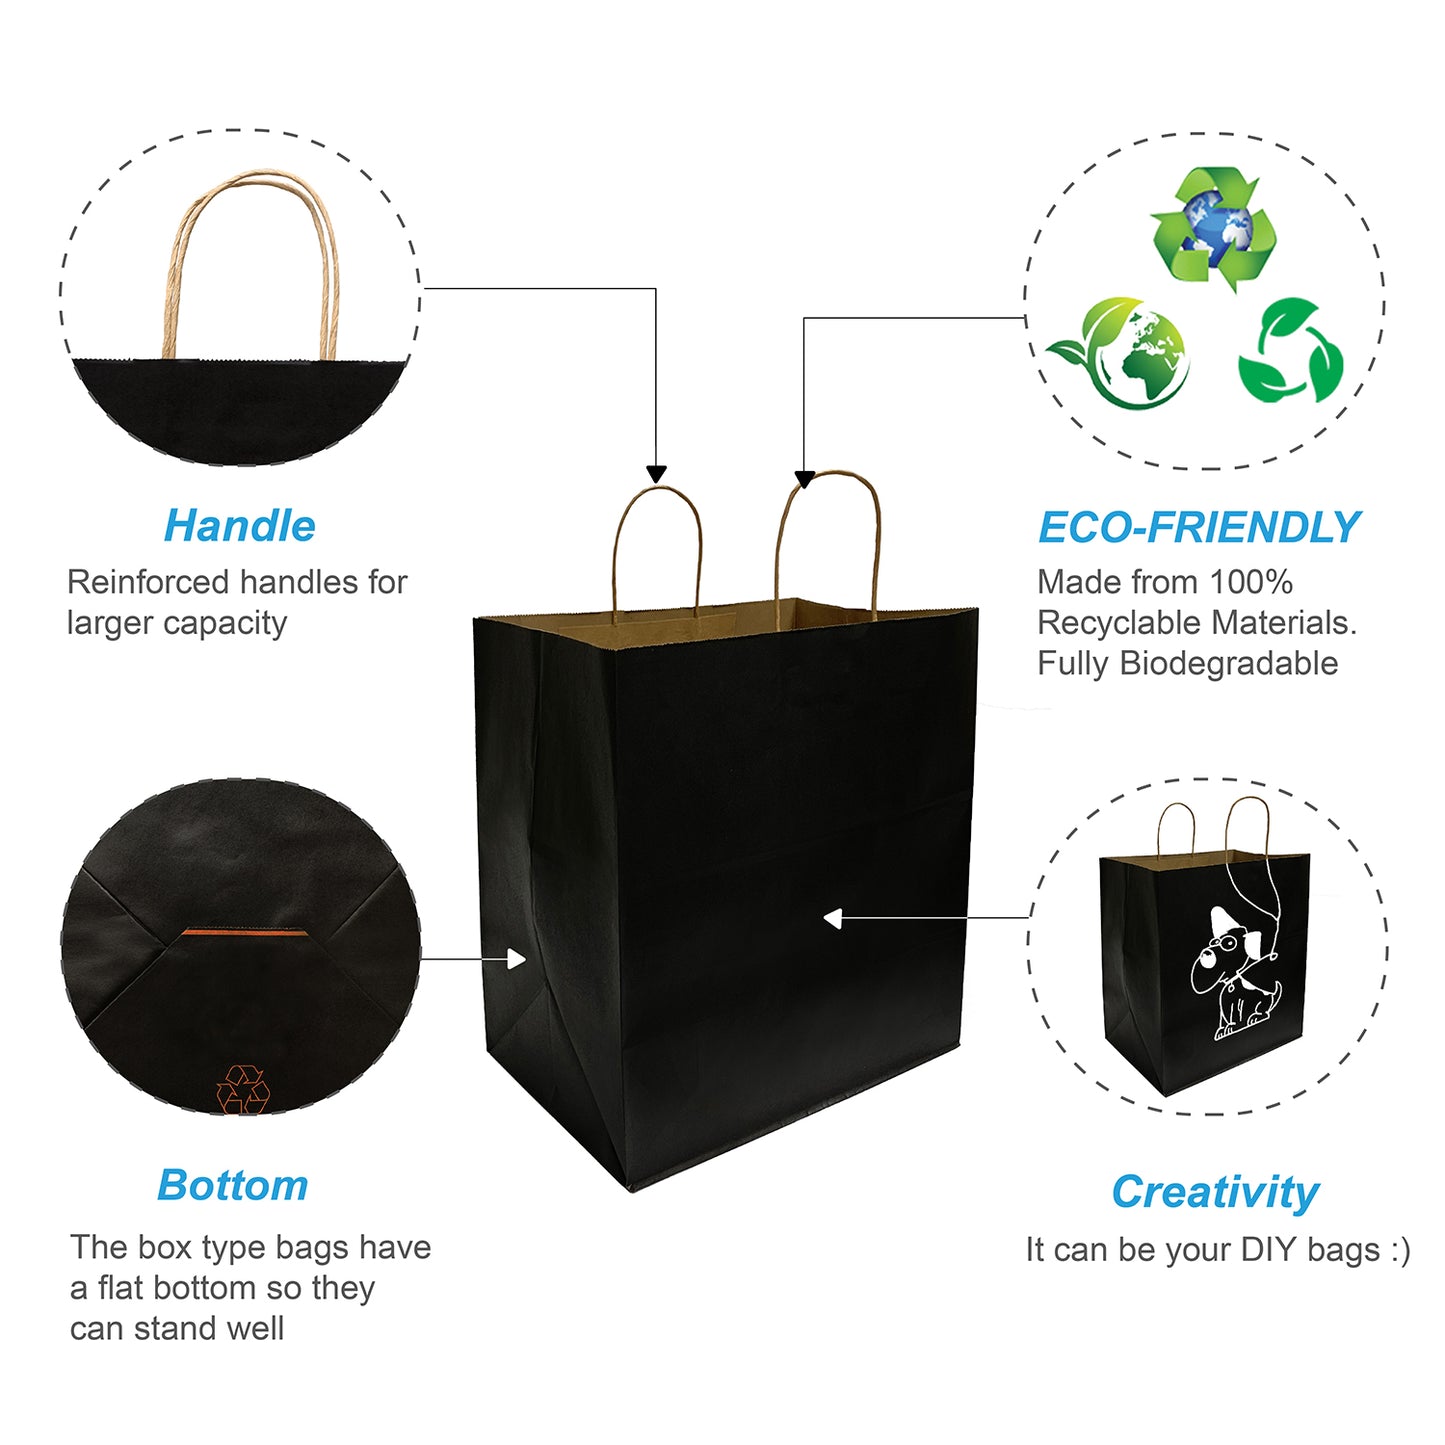 200 Pcs, Super Royal, 14x10x15.75 inches, Black Kraft Paper Bags, with Twisted Handle